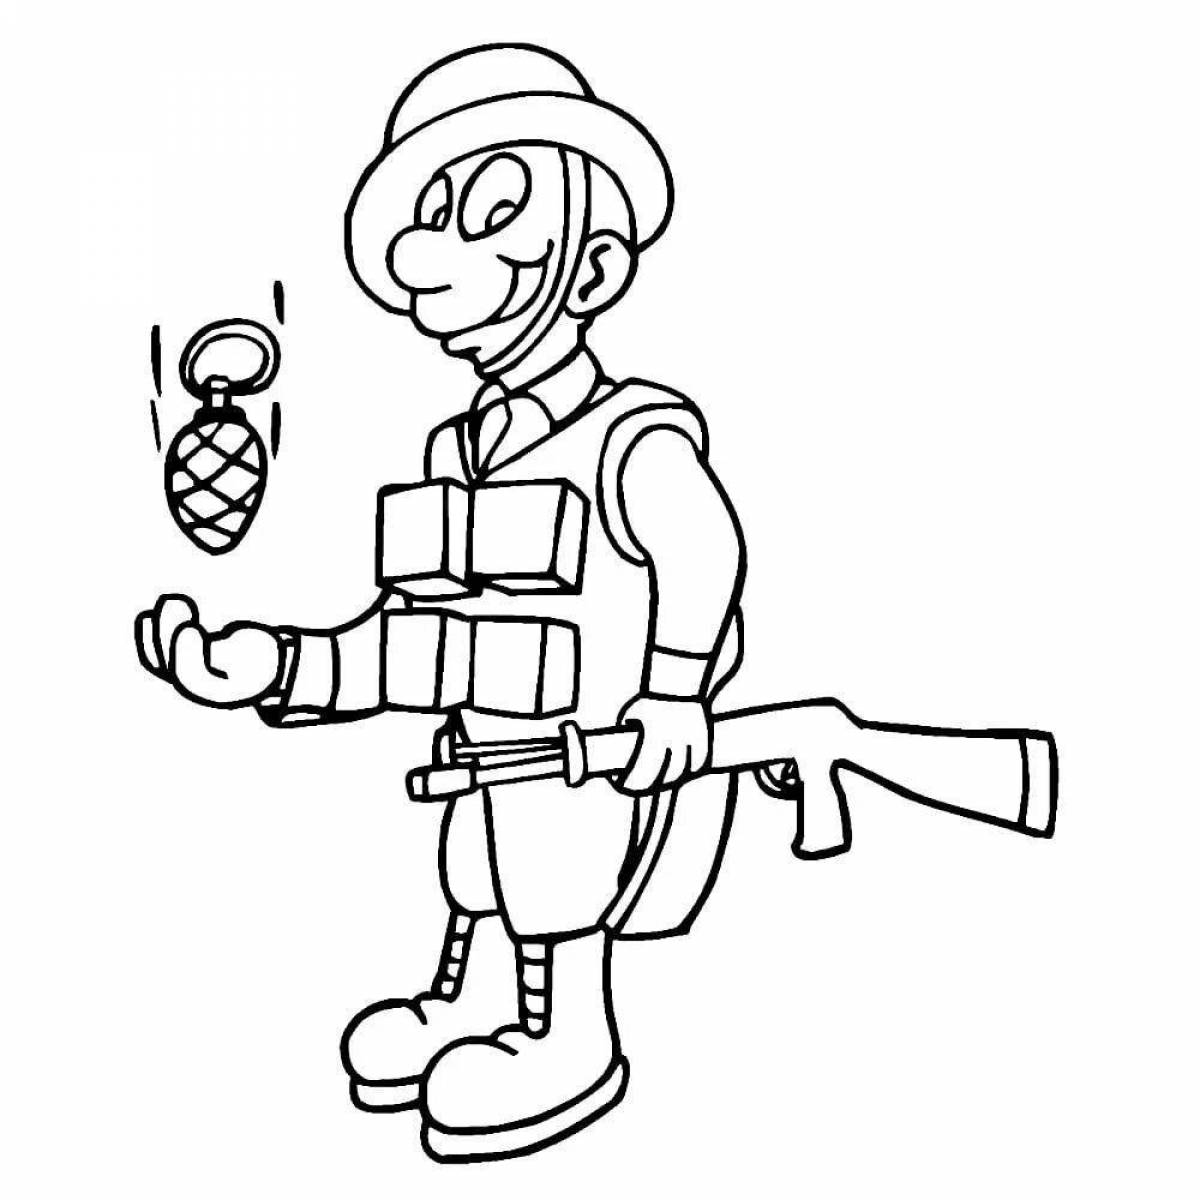 Exciting toy soldier coloring book